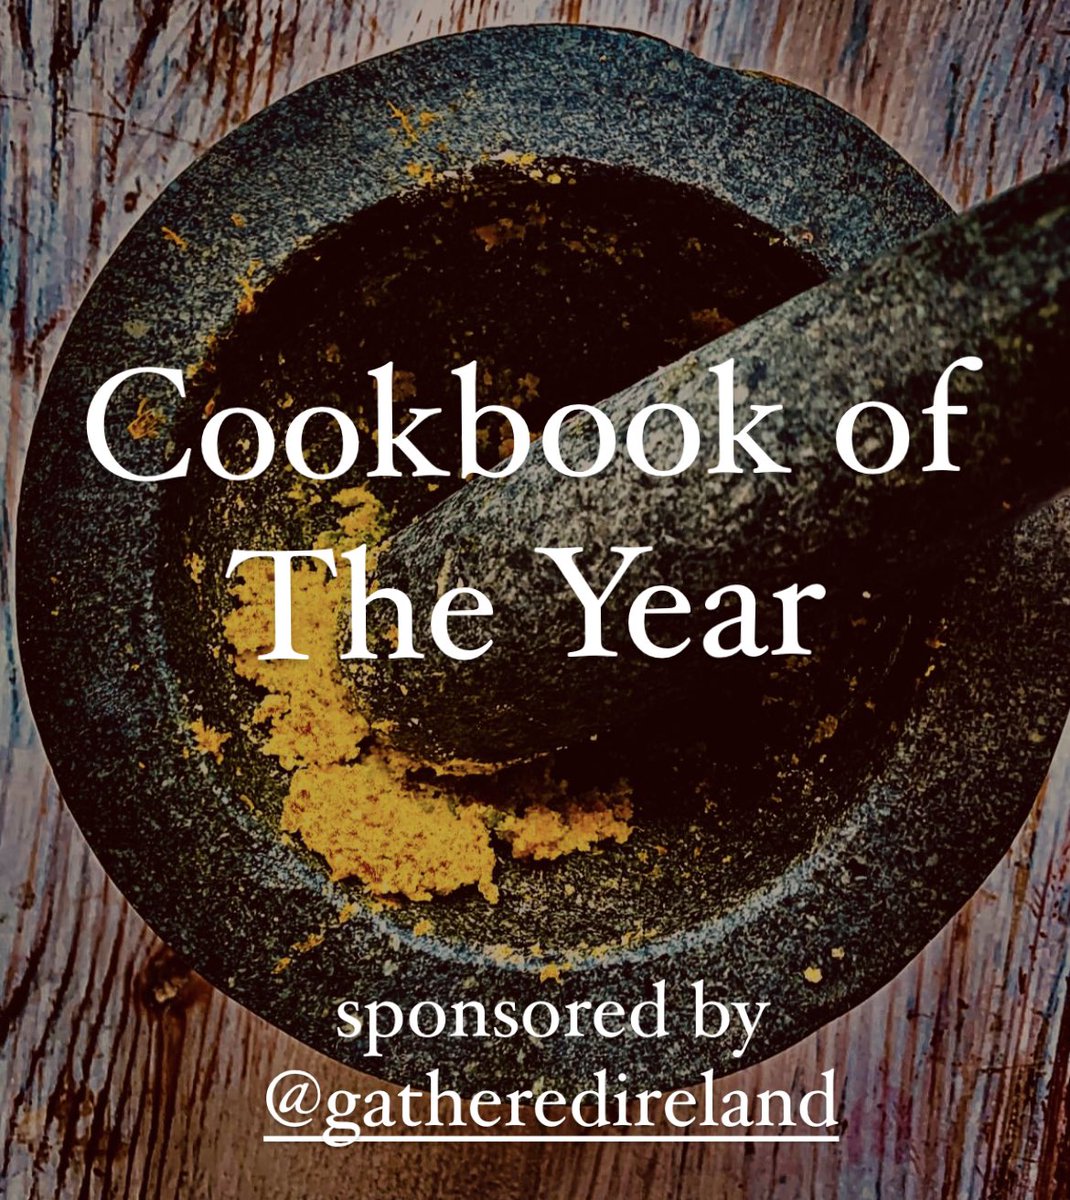 Congratulations finalists! Paradiso by @denis_cotter The Gathered Table by @GatheredIreland Bake by @thecupcakebloke Soup by @deelaffan @blancsvalencia, @jiemeimei and Ballymaloe Desserts by @JRRyall. Thanks to @Colmanandrews for judging and @gatheredireland who kindly sponsor